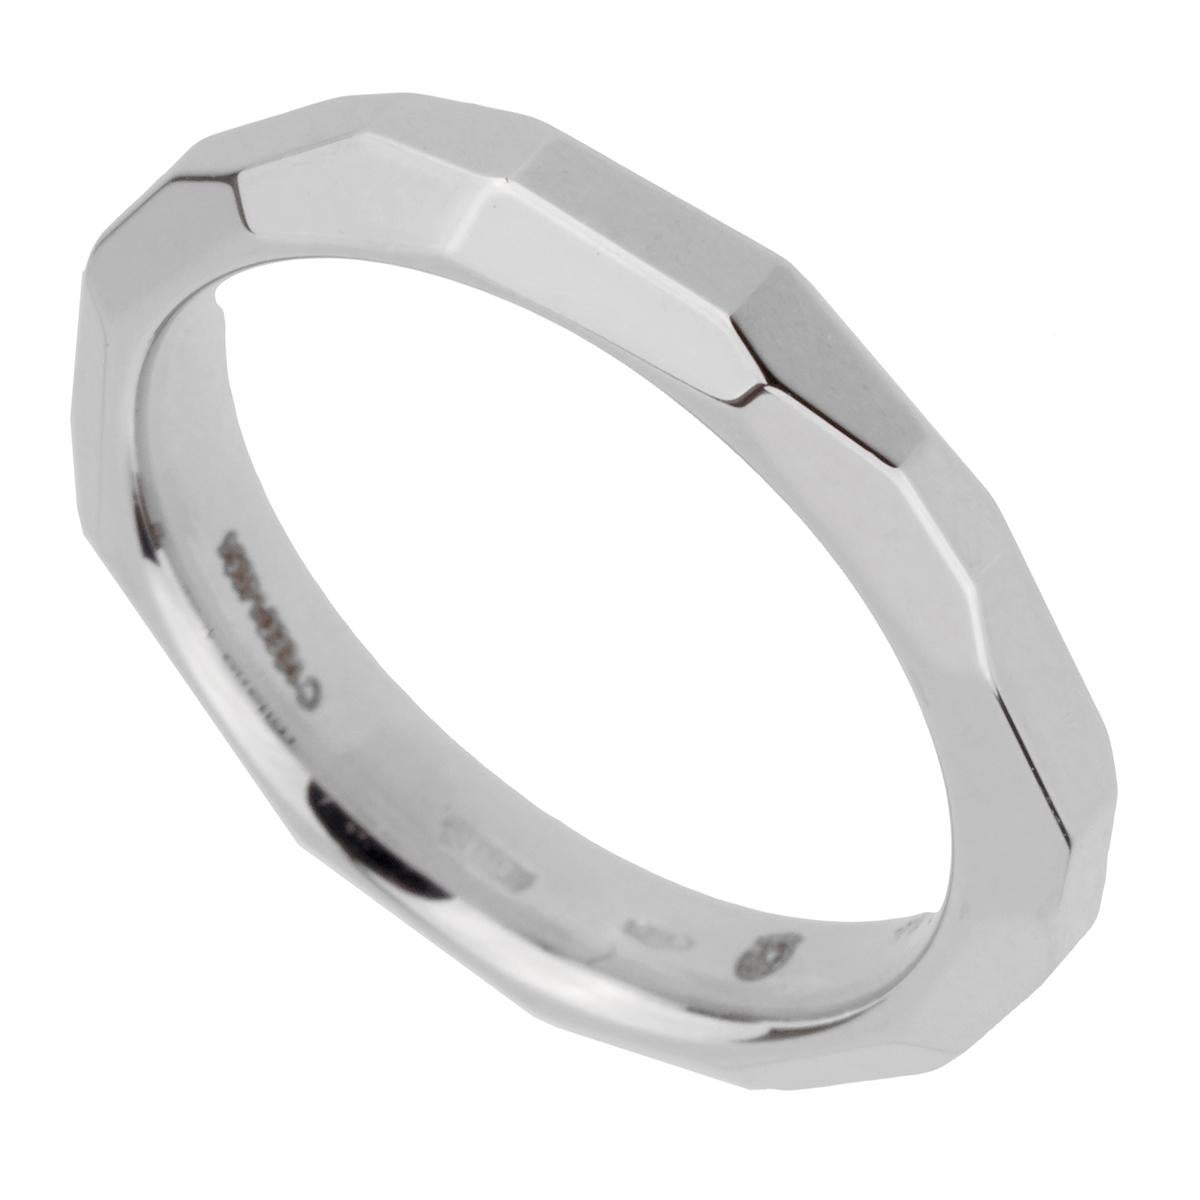 A chic white gold Pomellato band style ring crafted in 18k white gold, The ring measures a size 6.75 and can be resized.

Sku: 2394